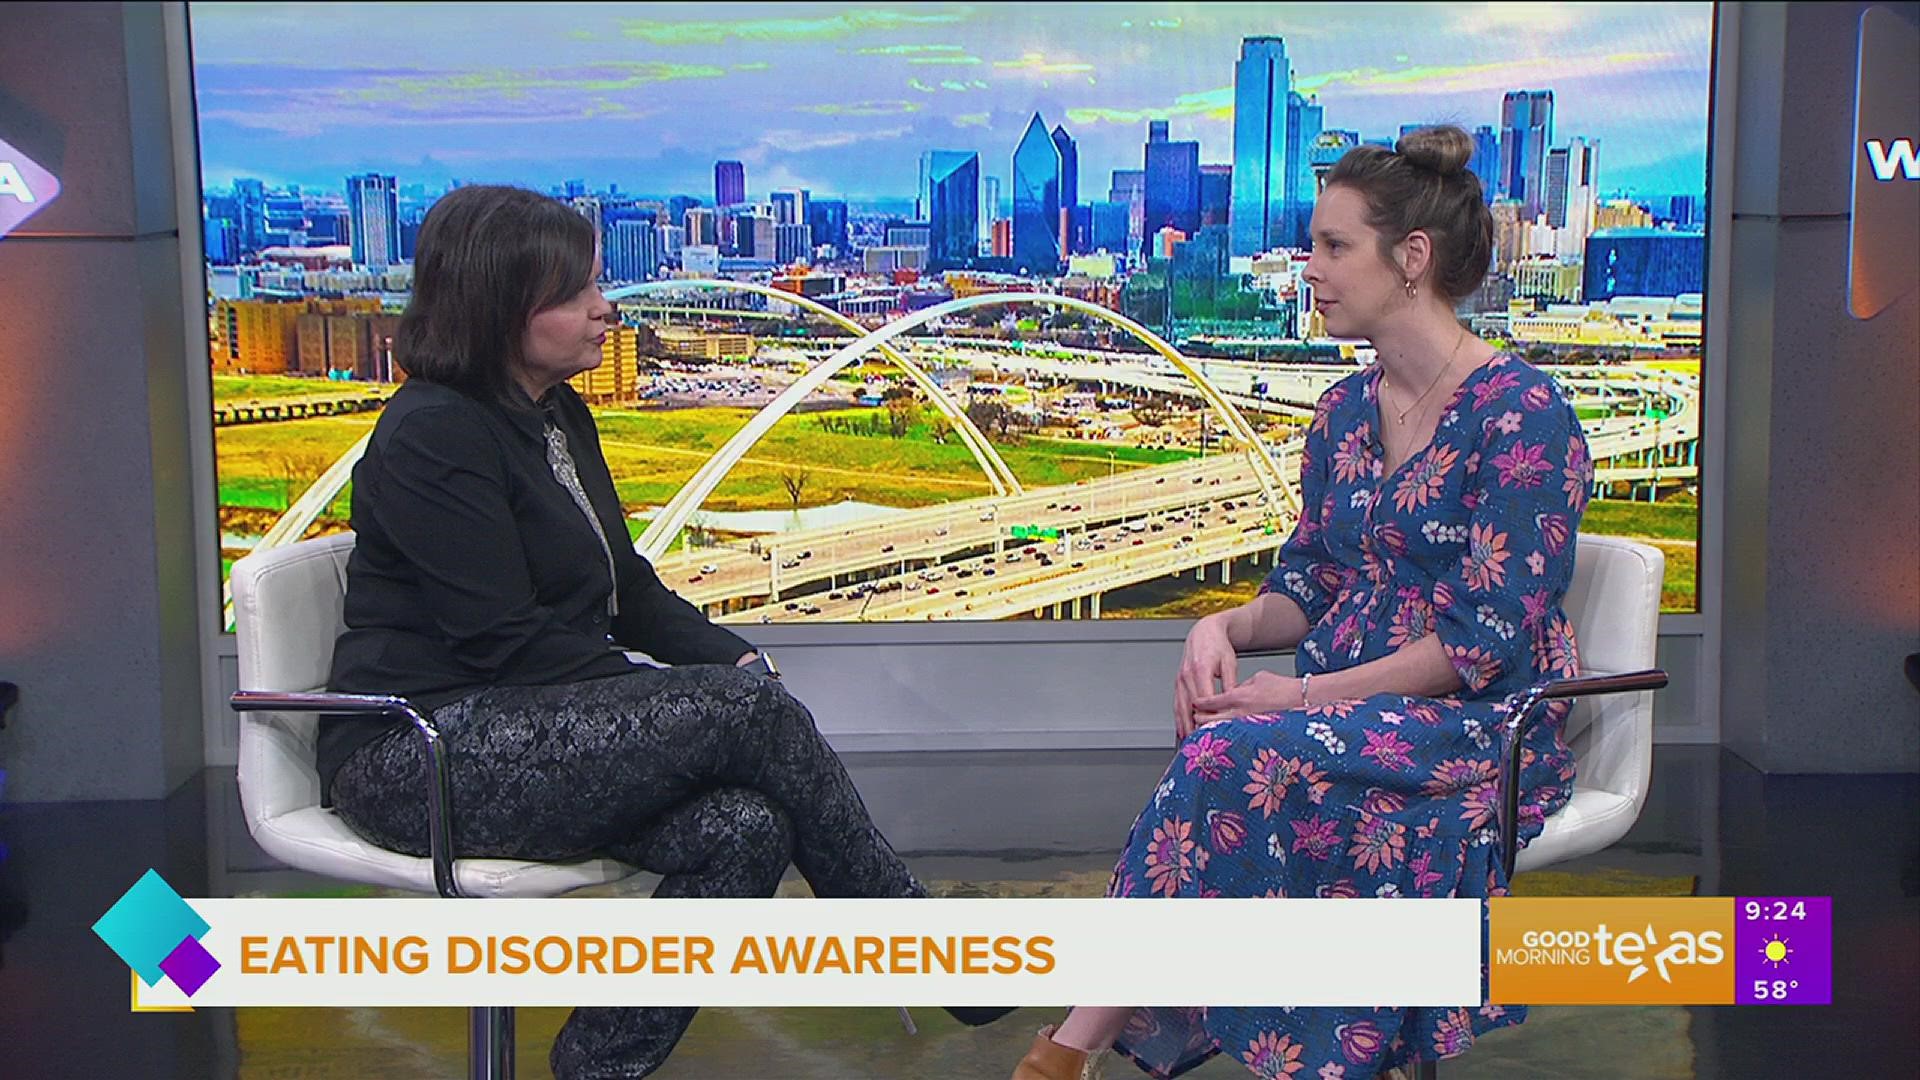 It’s Eating Disorder Awareness Week. Registered Dietitian Maggy Doherty shares what signs to look for and how to seek help.